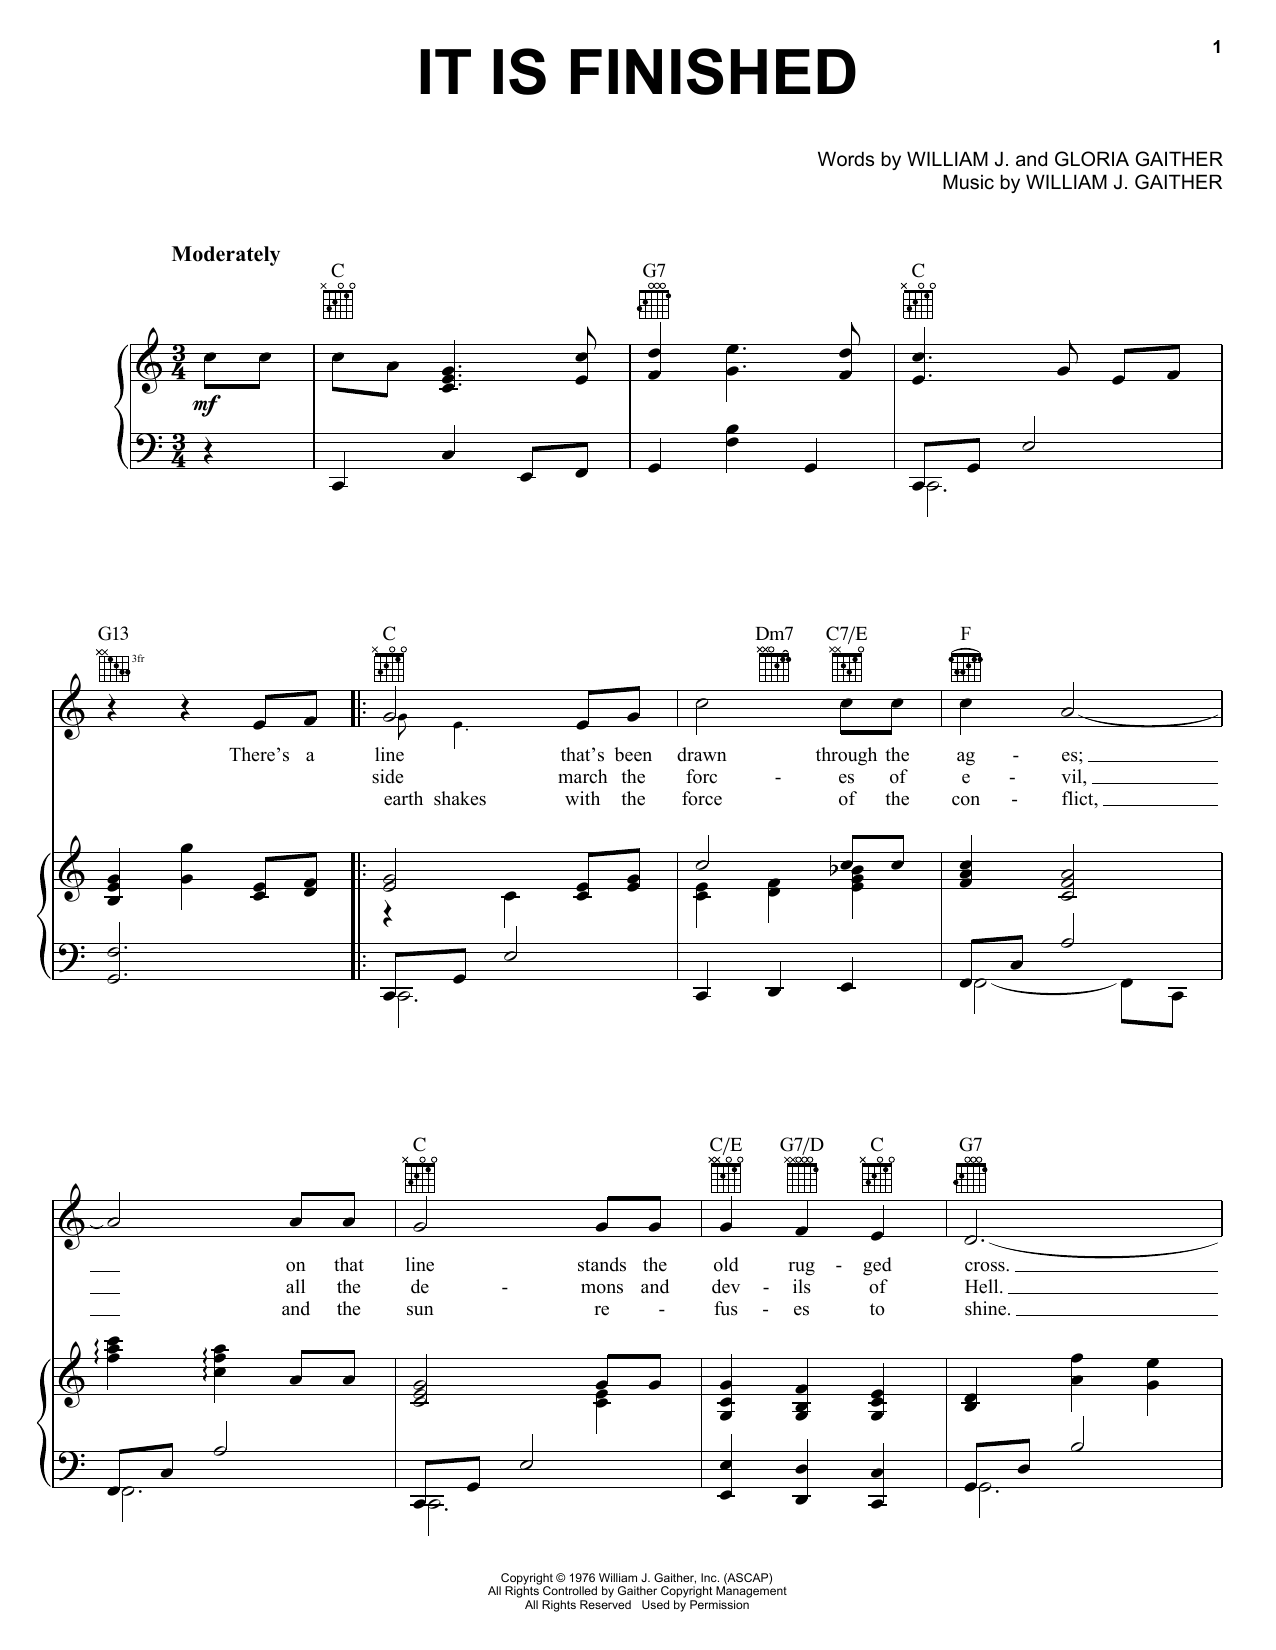 Download Bill & Gloria Gaither It Is Finished Sheet Music